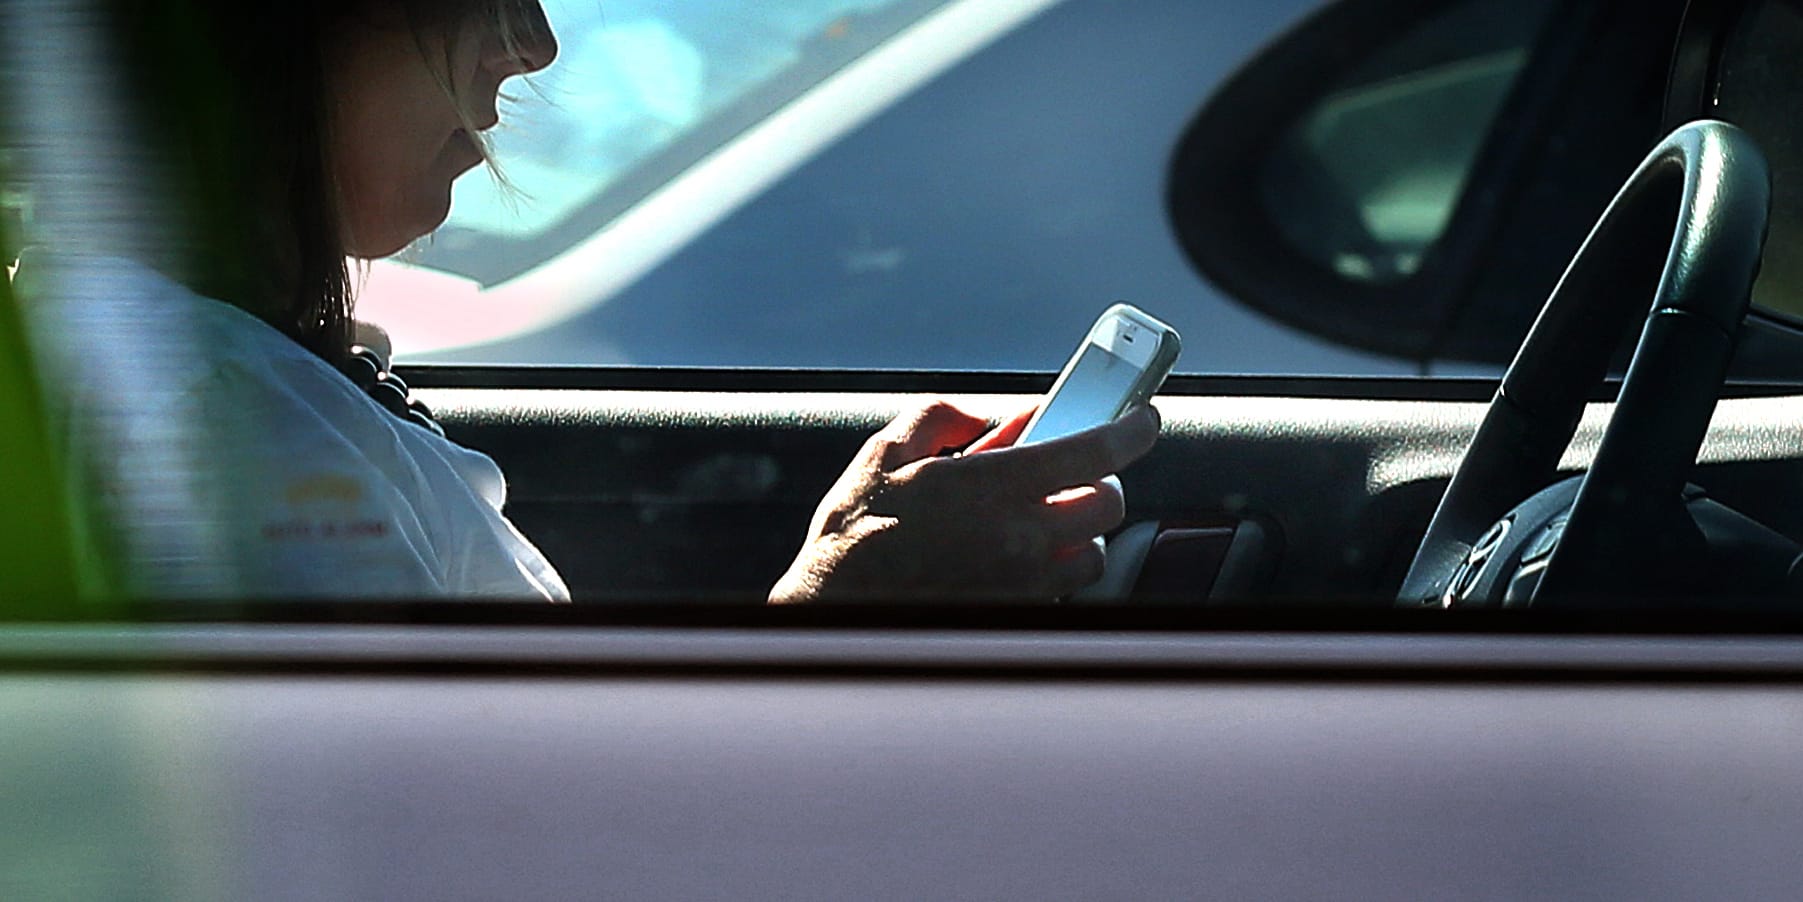 Hands on the wheel: We can all do our part to end distracted driving